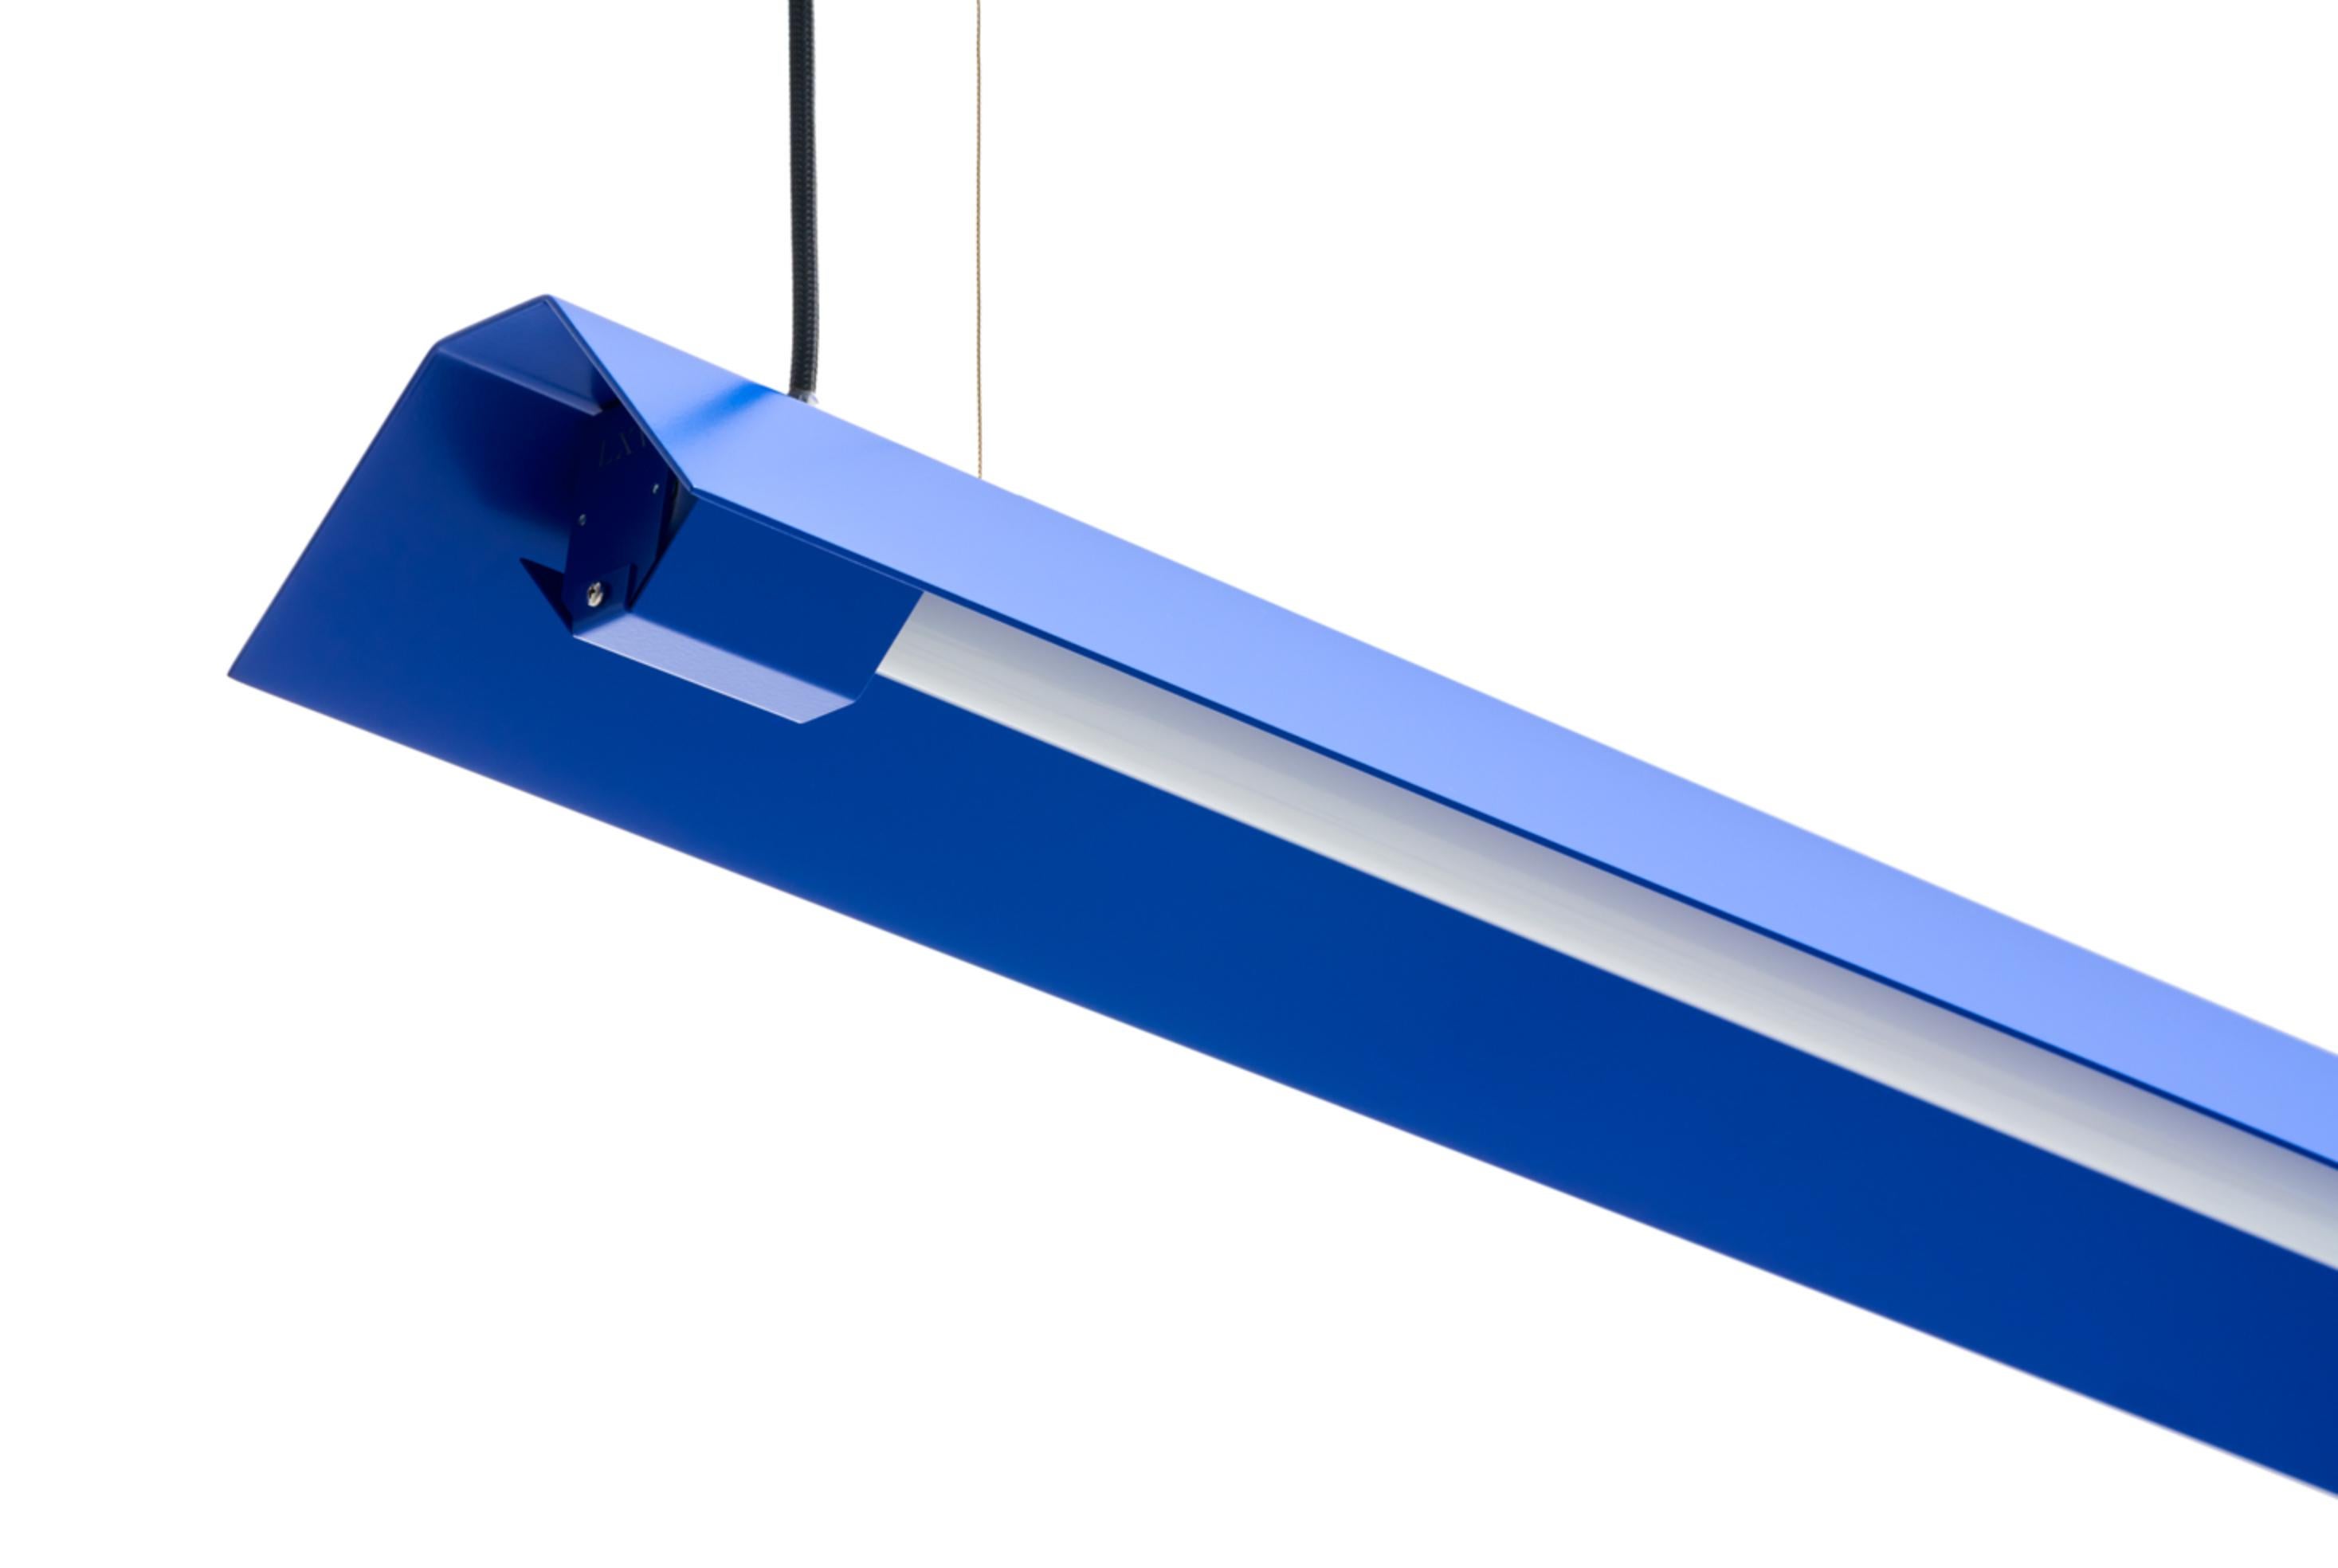 Large Misalliance Ral ultramarine suspended light by Lexavala
Dimensions: D 16 x W 130 x H 8 cm
Materials: powder coated aluminium.

There are two lenghts of socket covers, extending over the LED. Two short are to be found in Suspended and